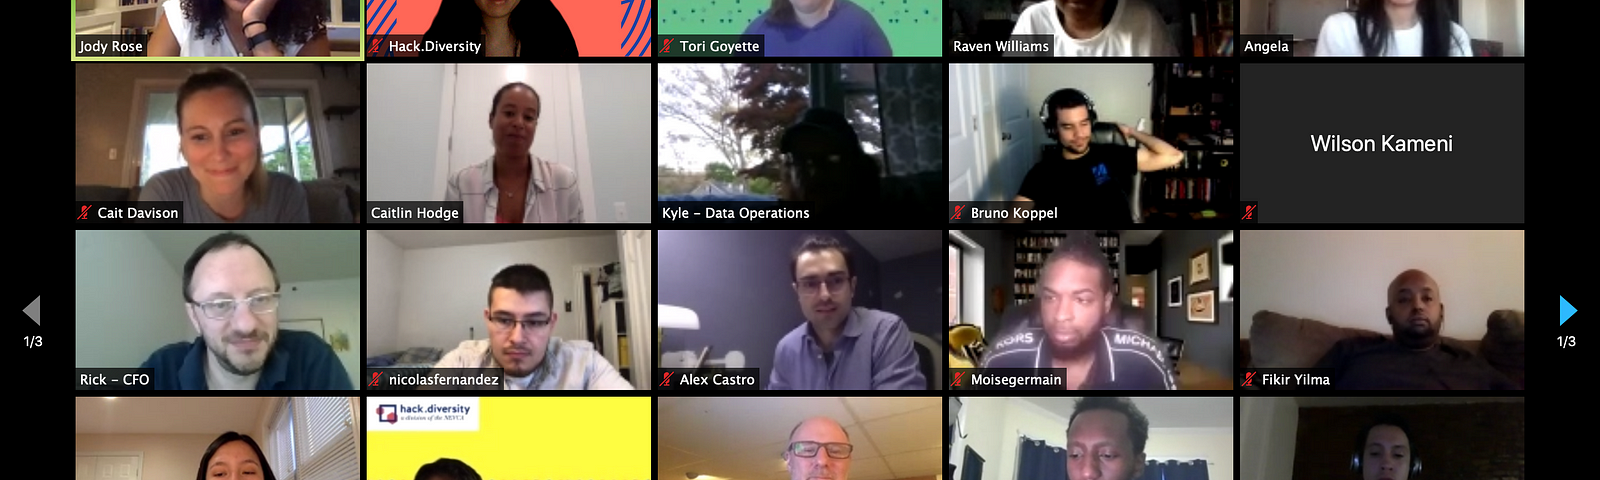 Screenshot of our Hack.Chat which occurred via Zoom meeting. Picture shows some Hack.Diversity Fellows and Comlinkdata team.